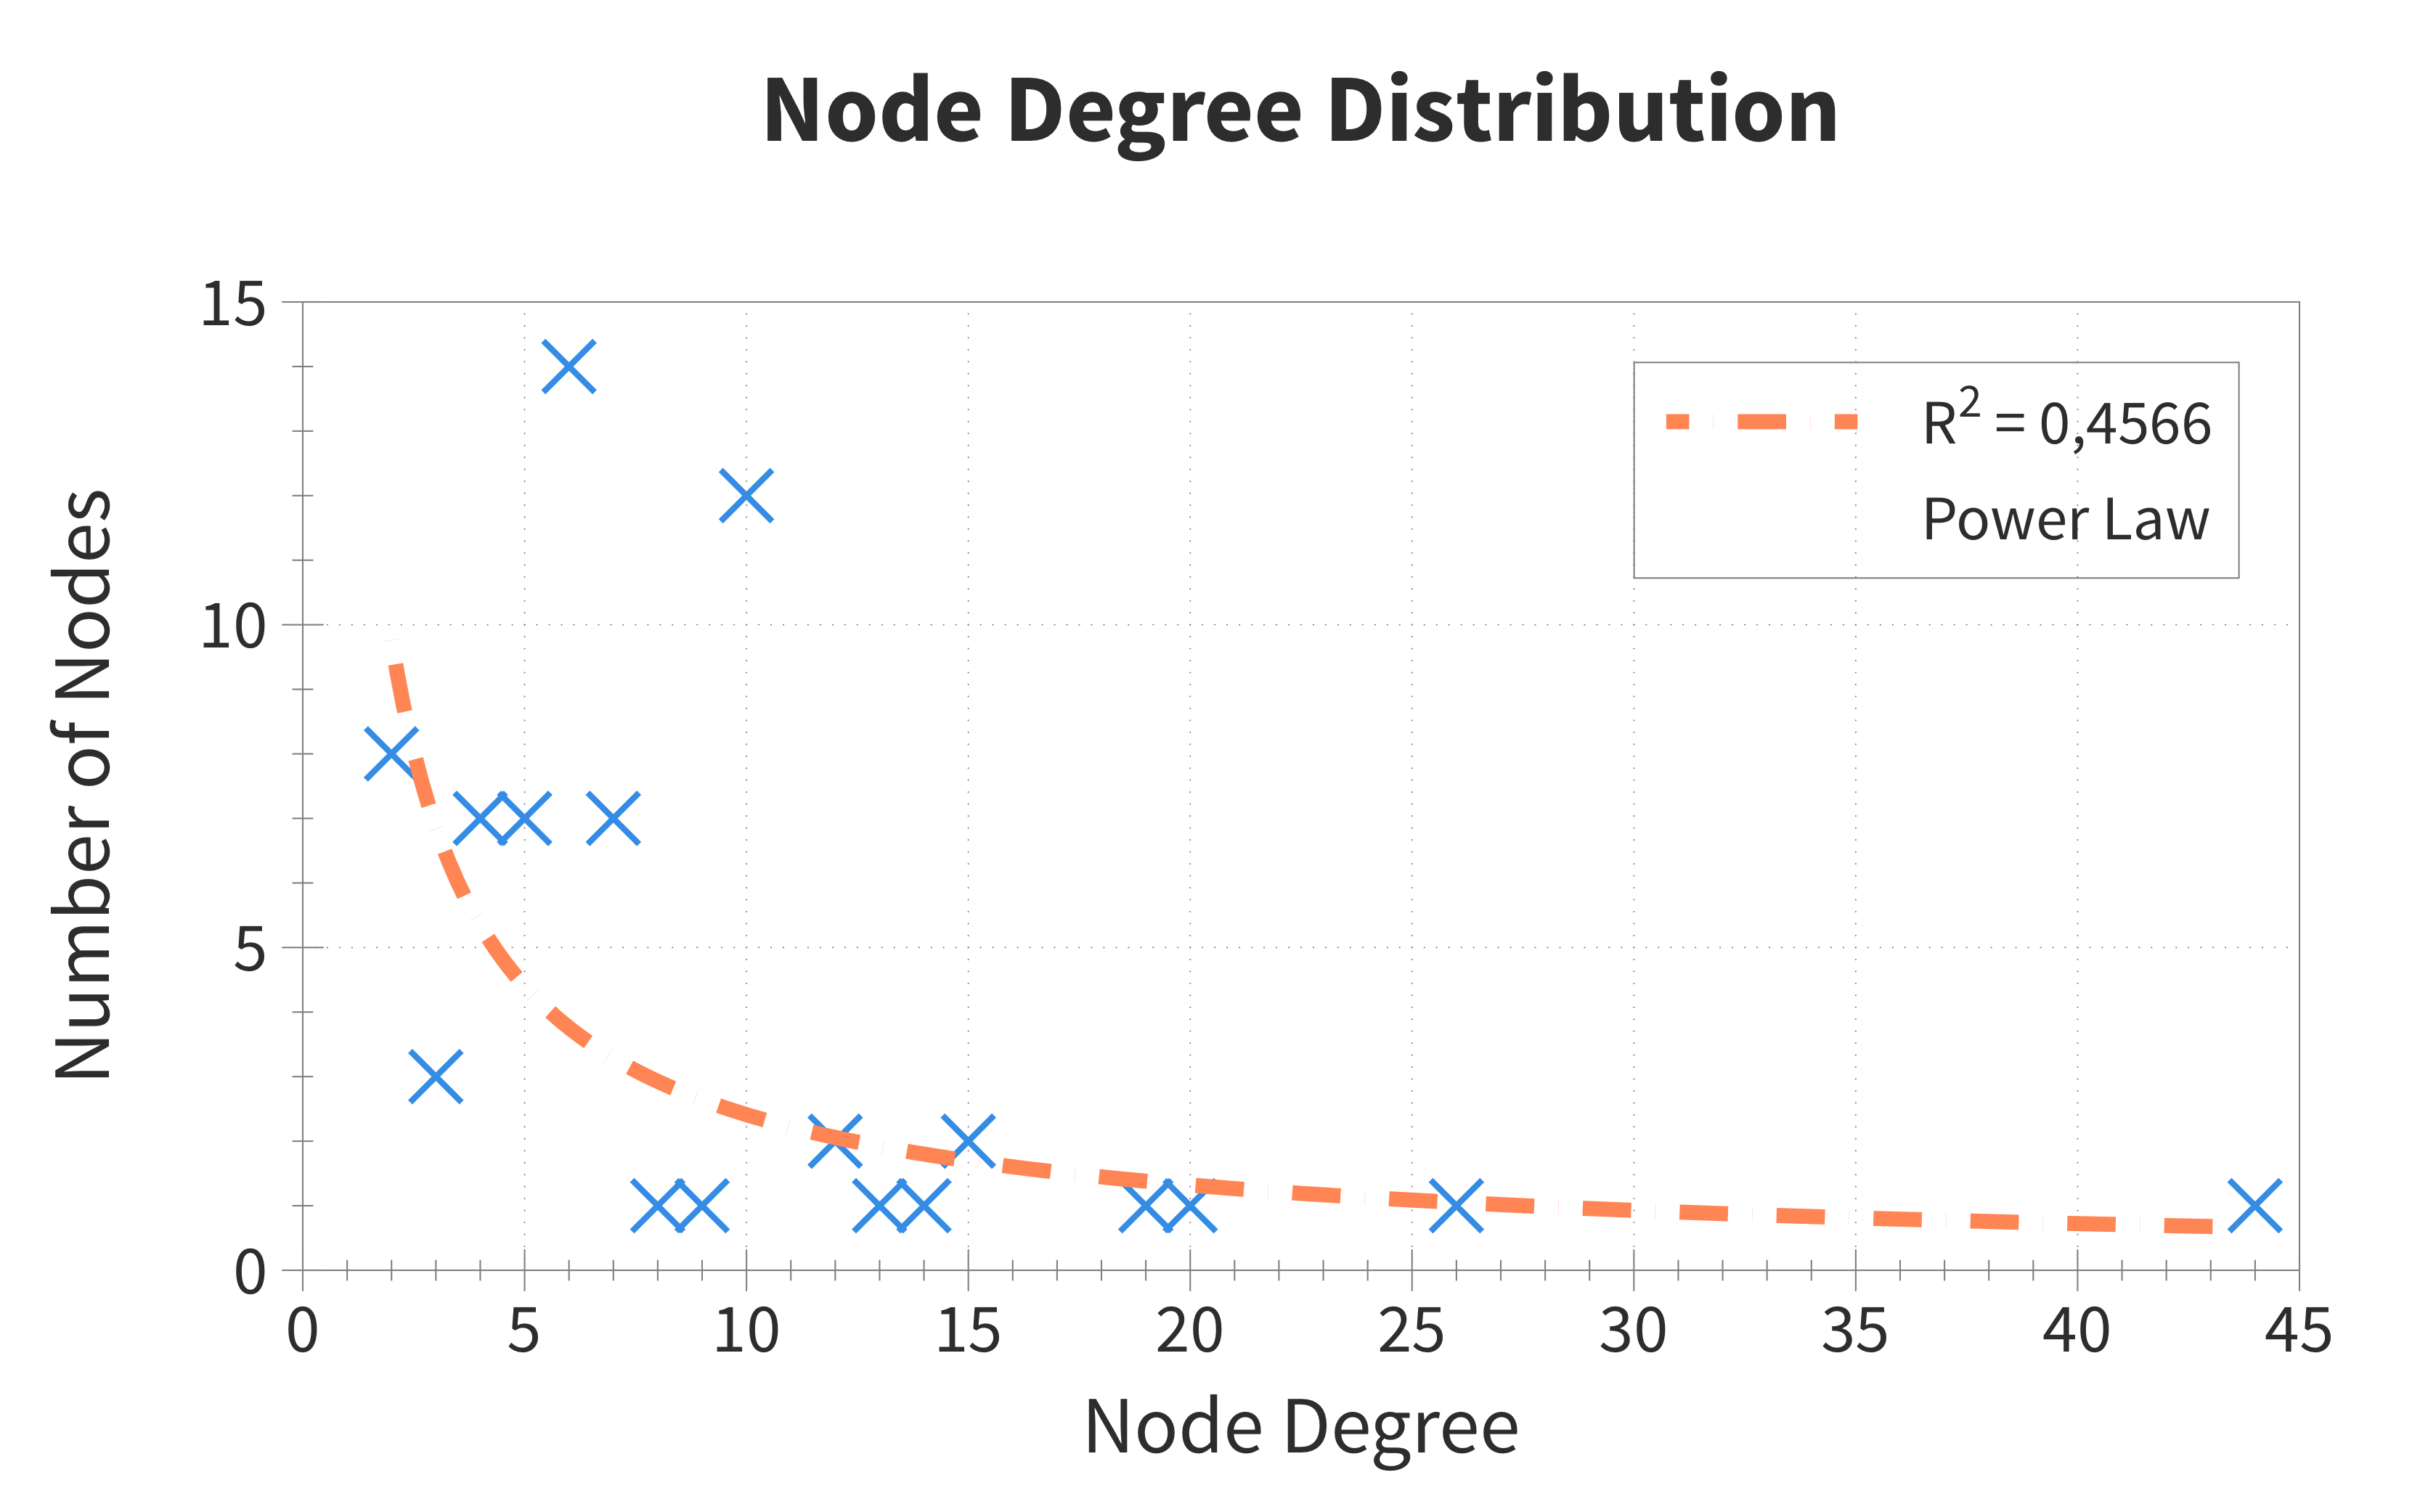 NDD with power-law distribution